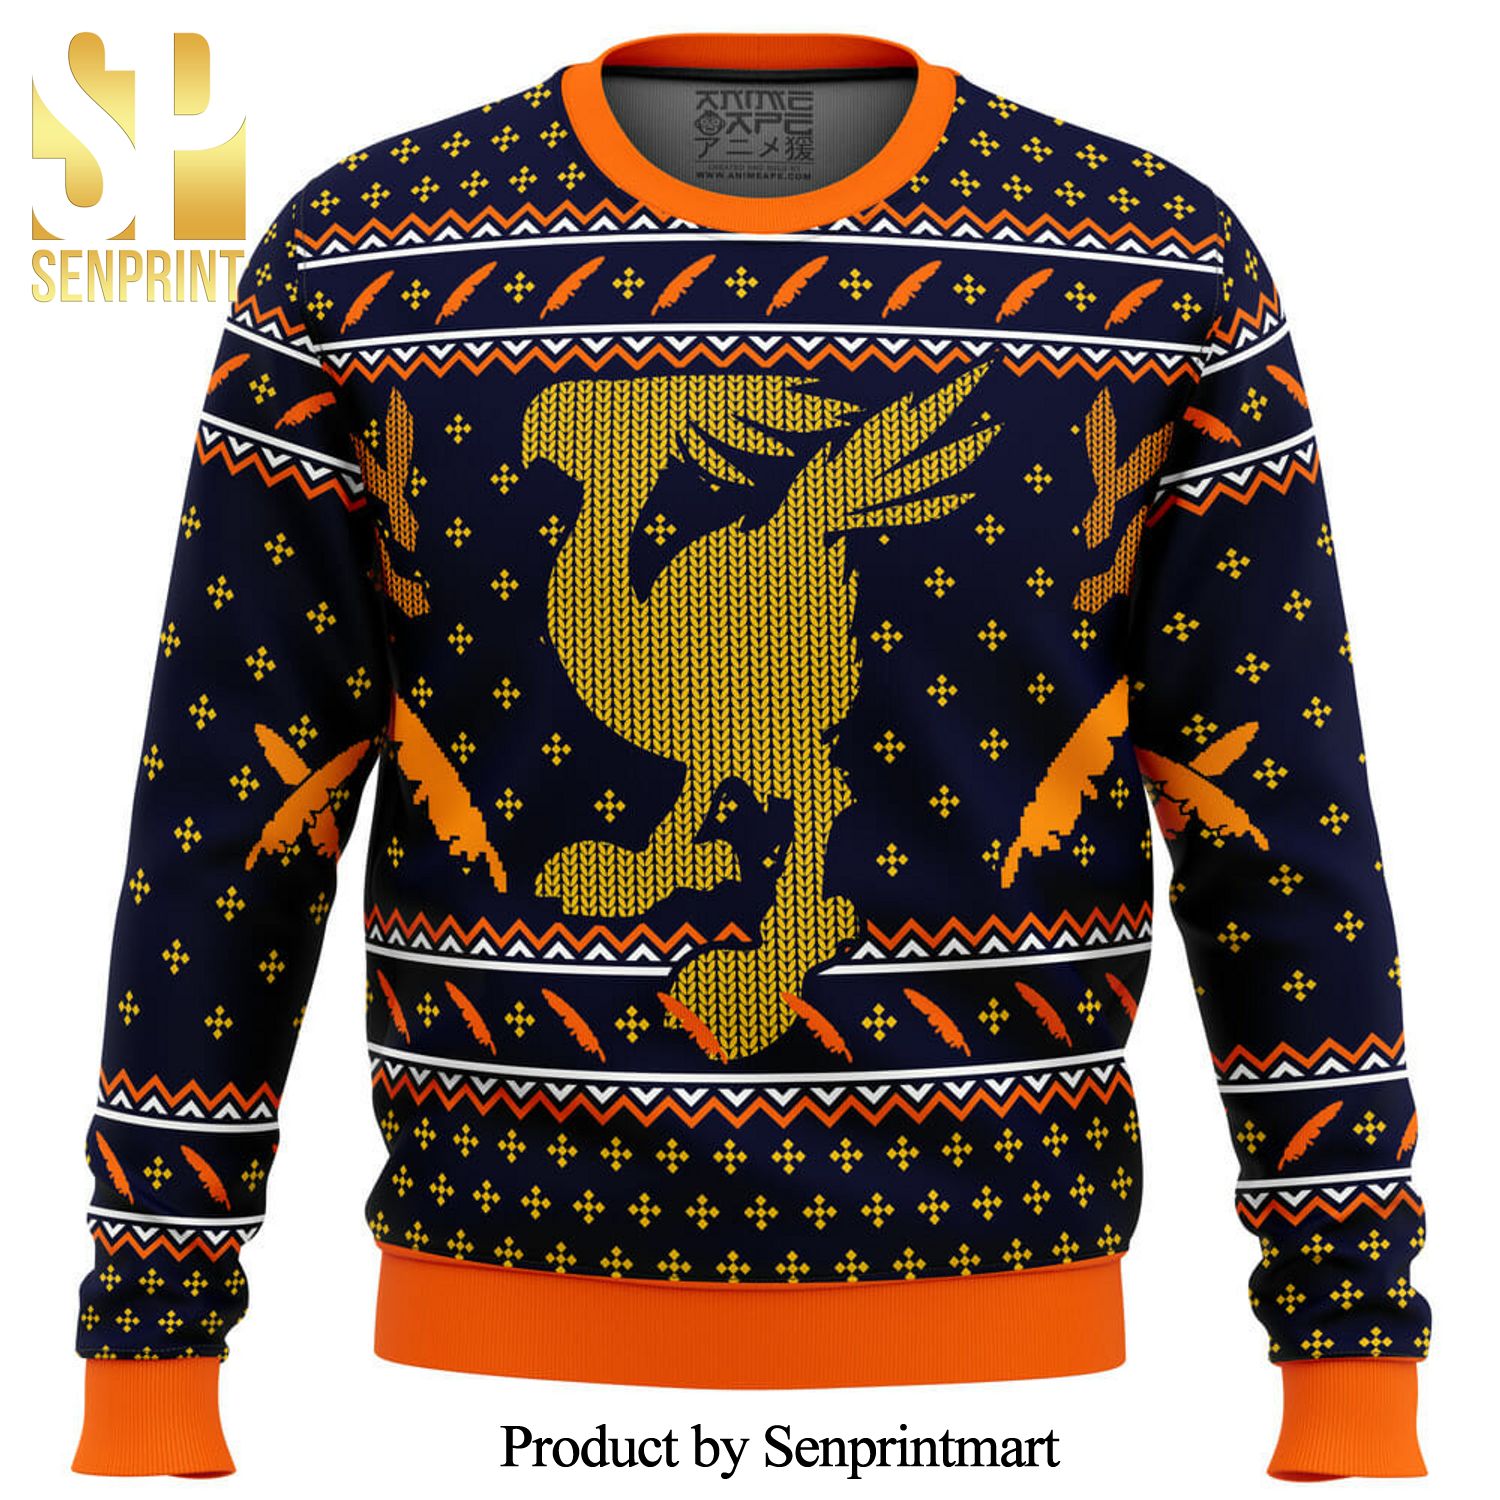 Final Fantasy Chocobo Knitted Ugly Christmas Sweater